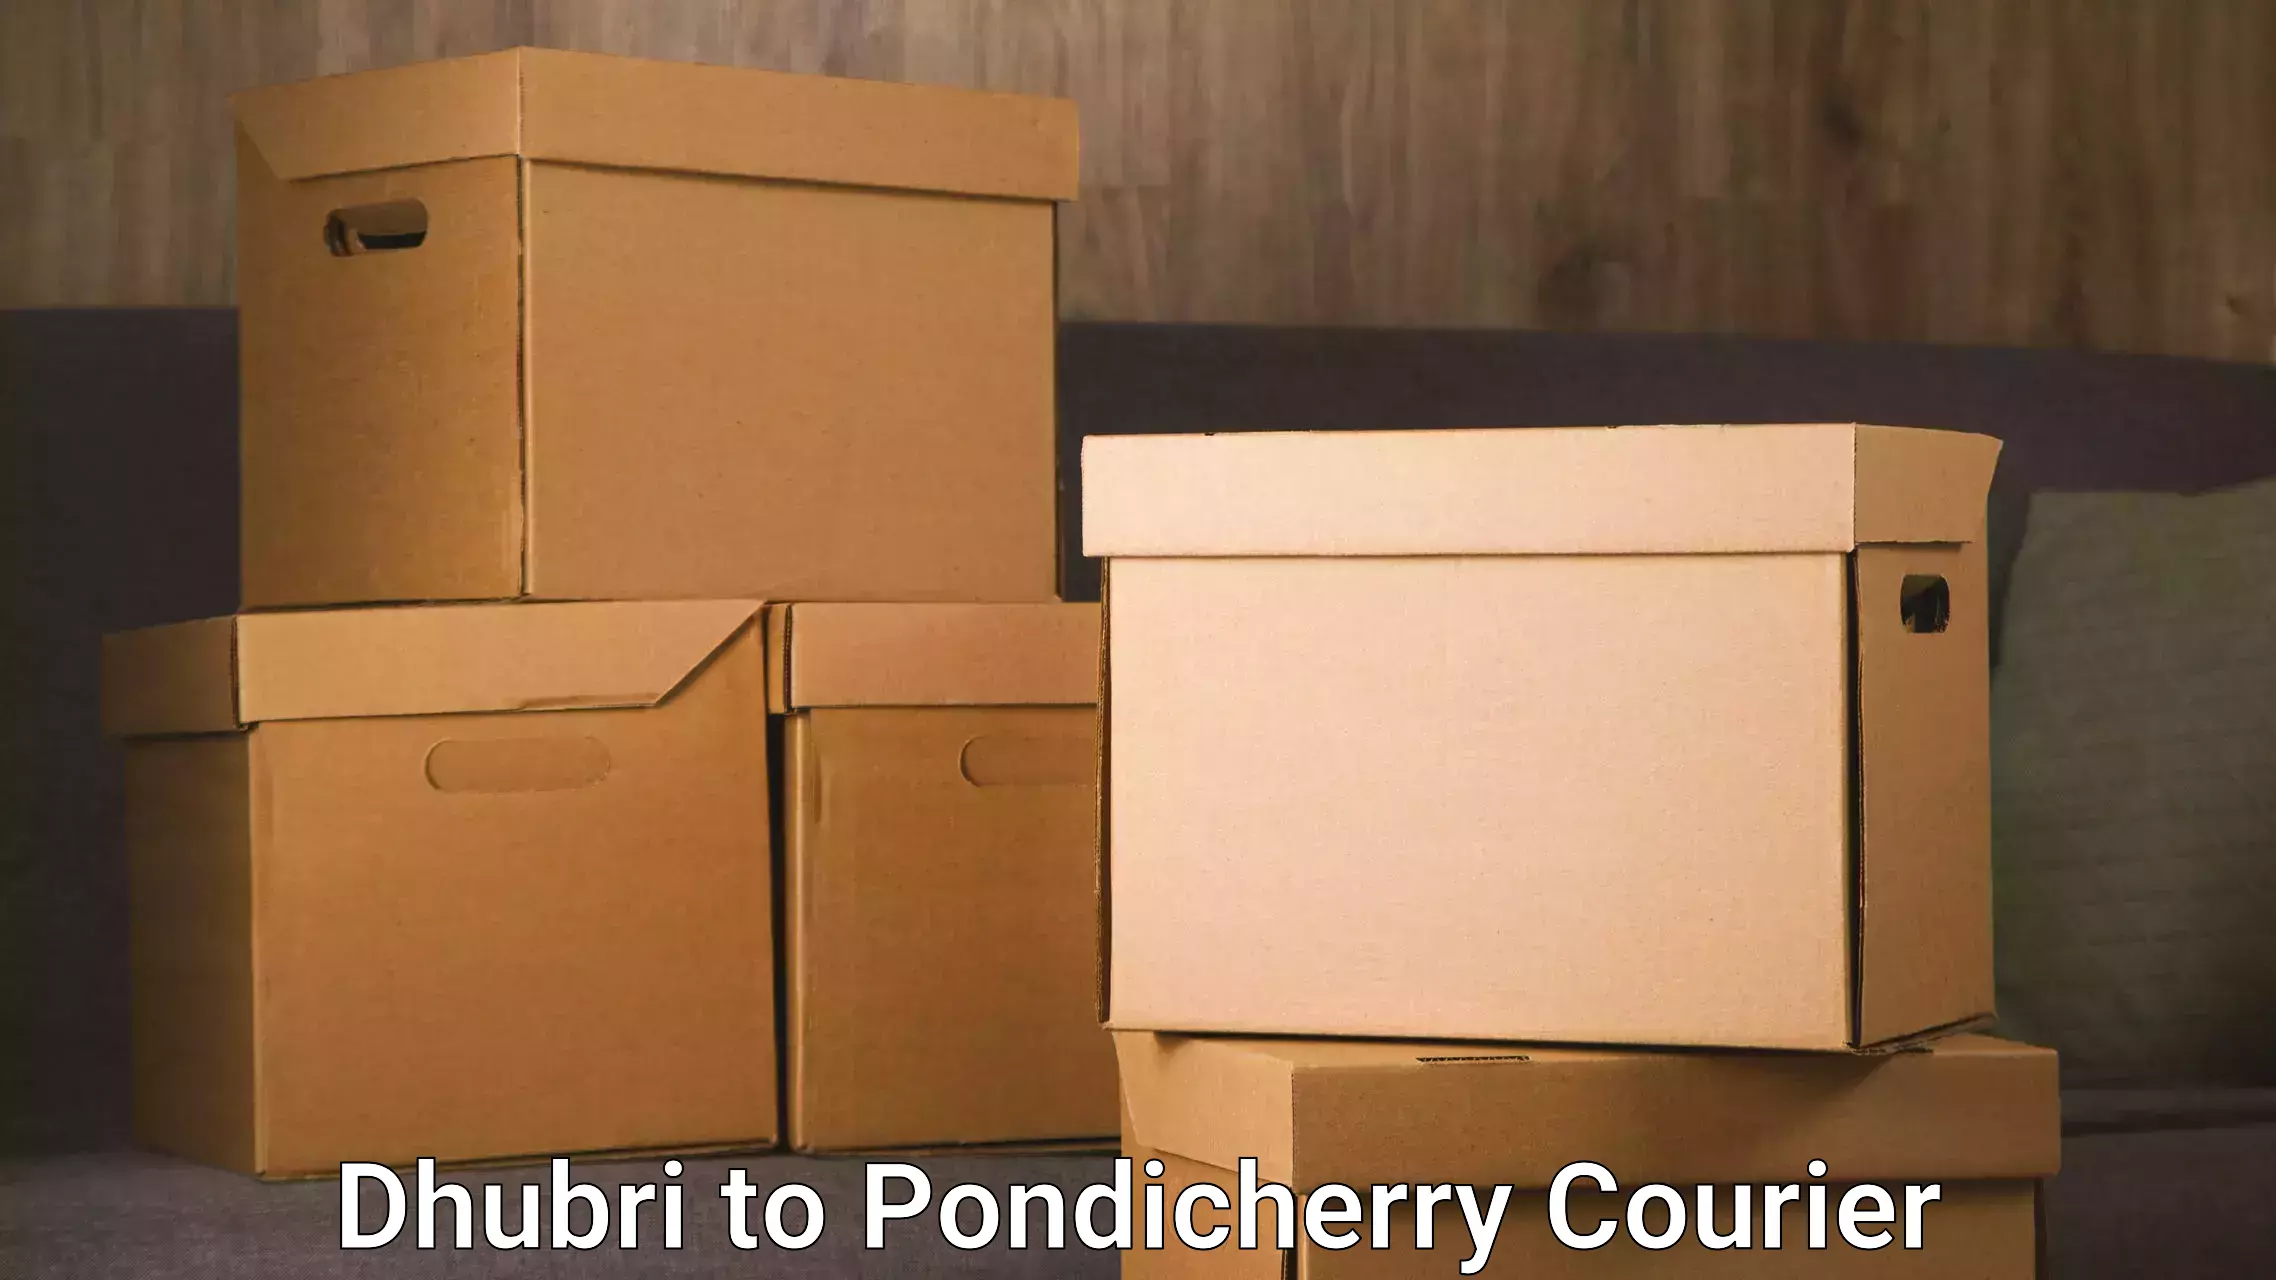 Reliable delivery network Dhubri to Pondicherry University